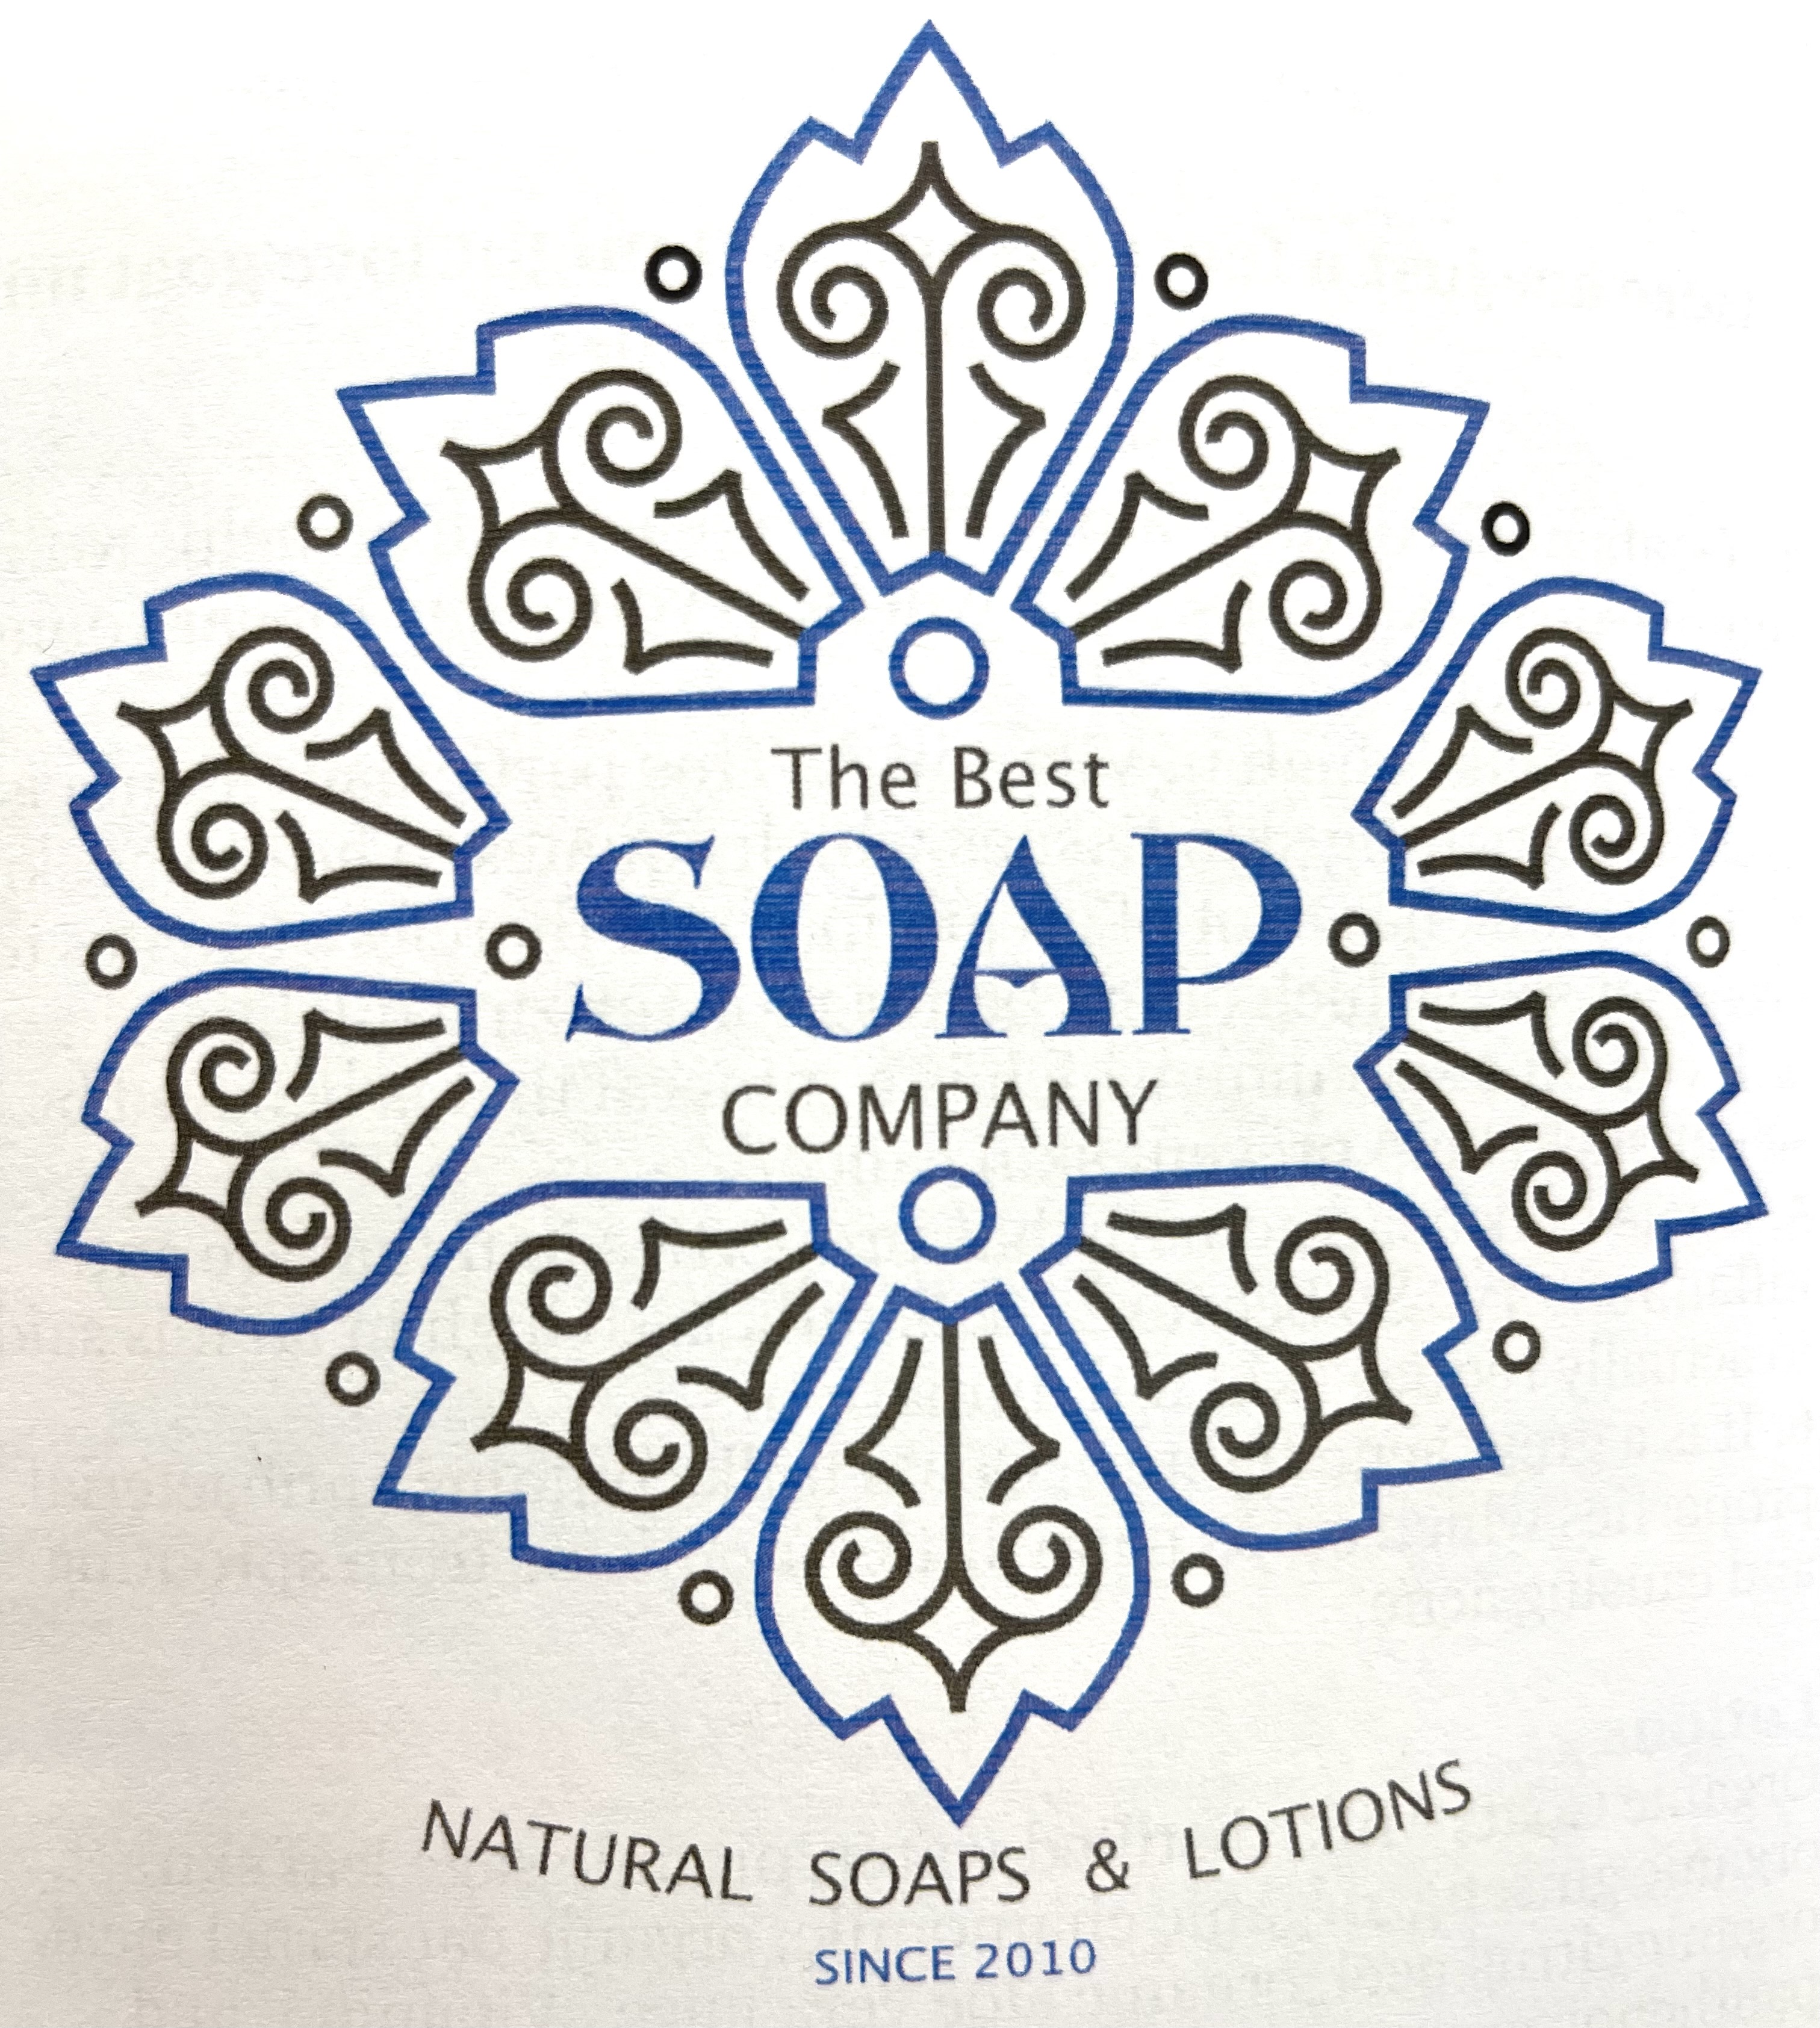 The Best Soap Company